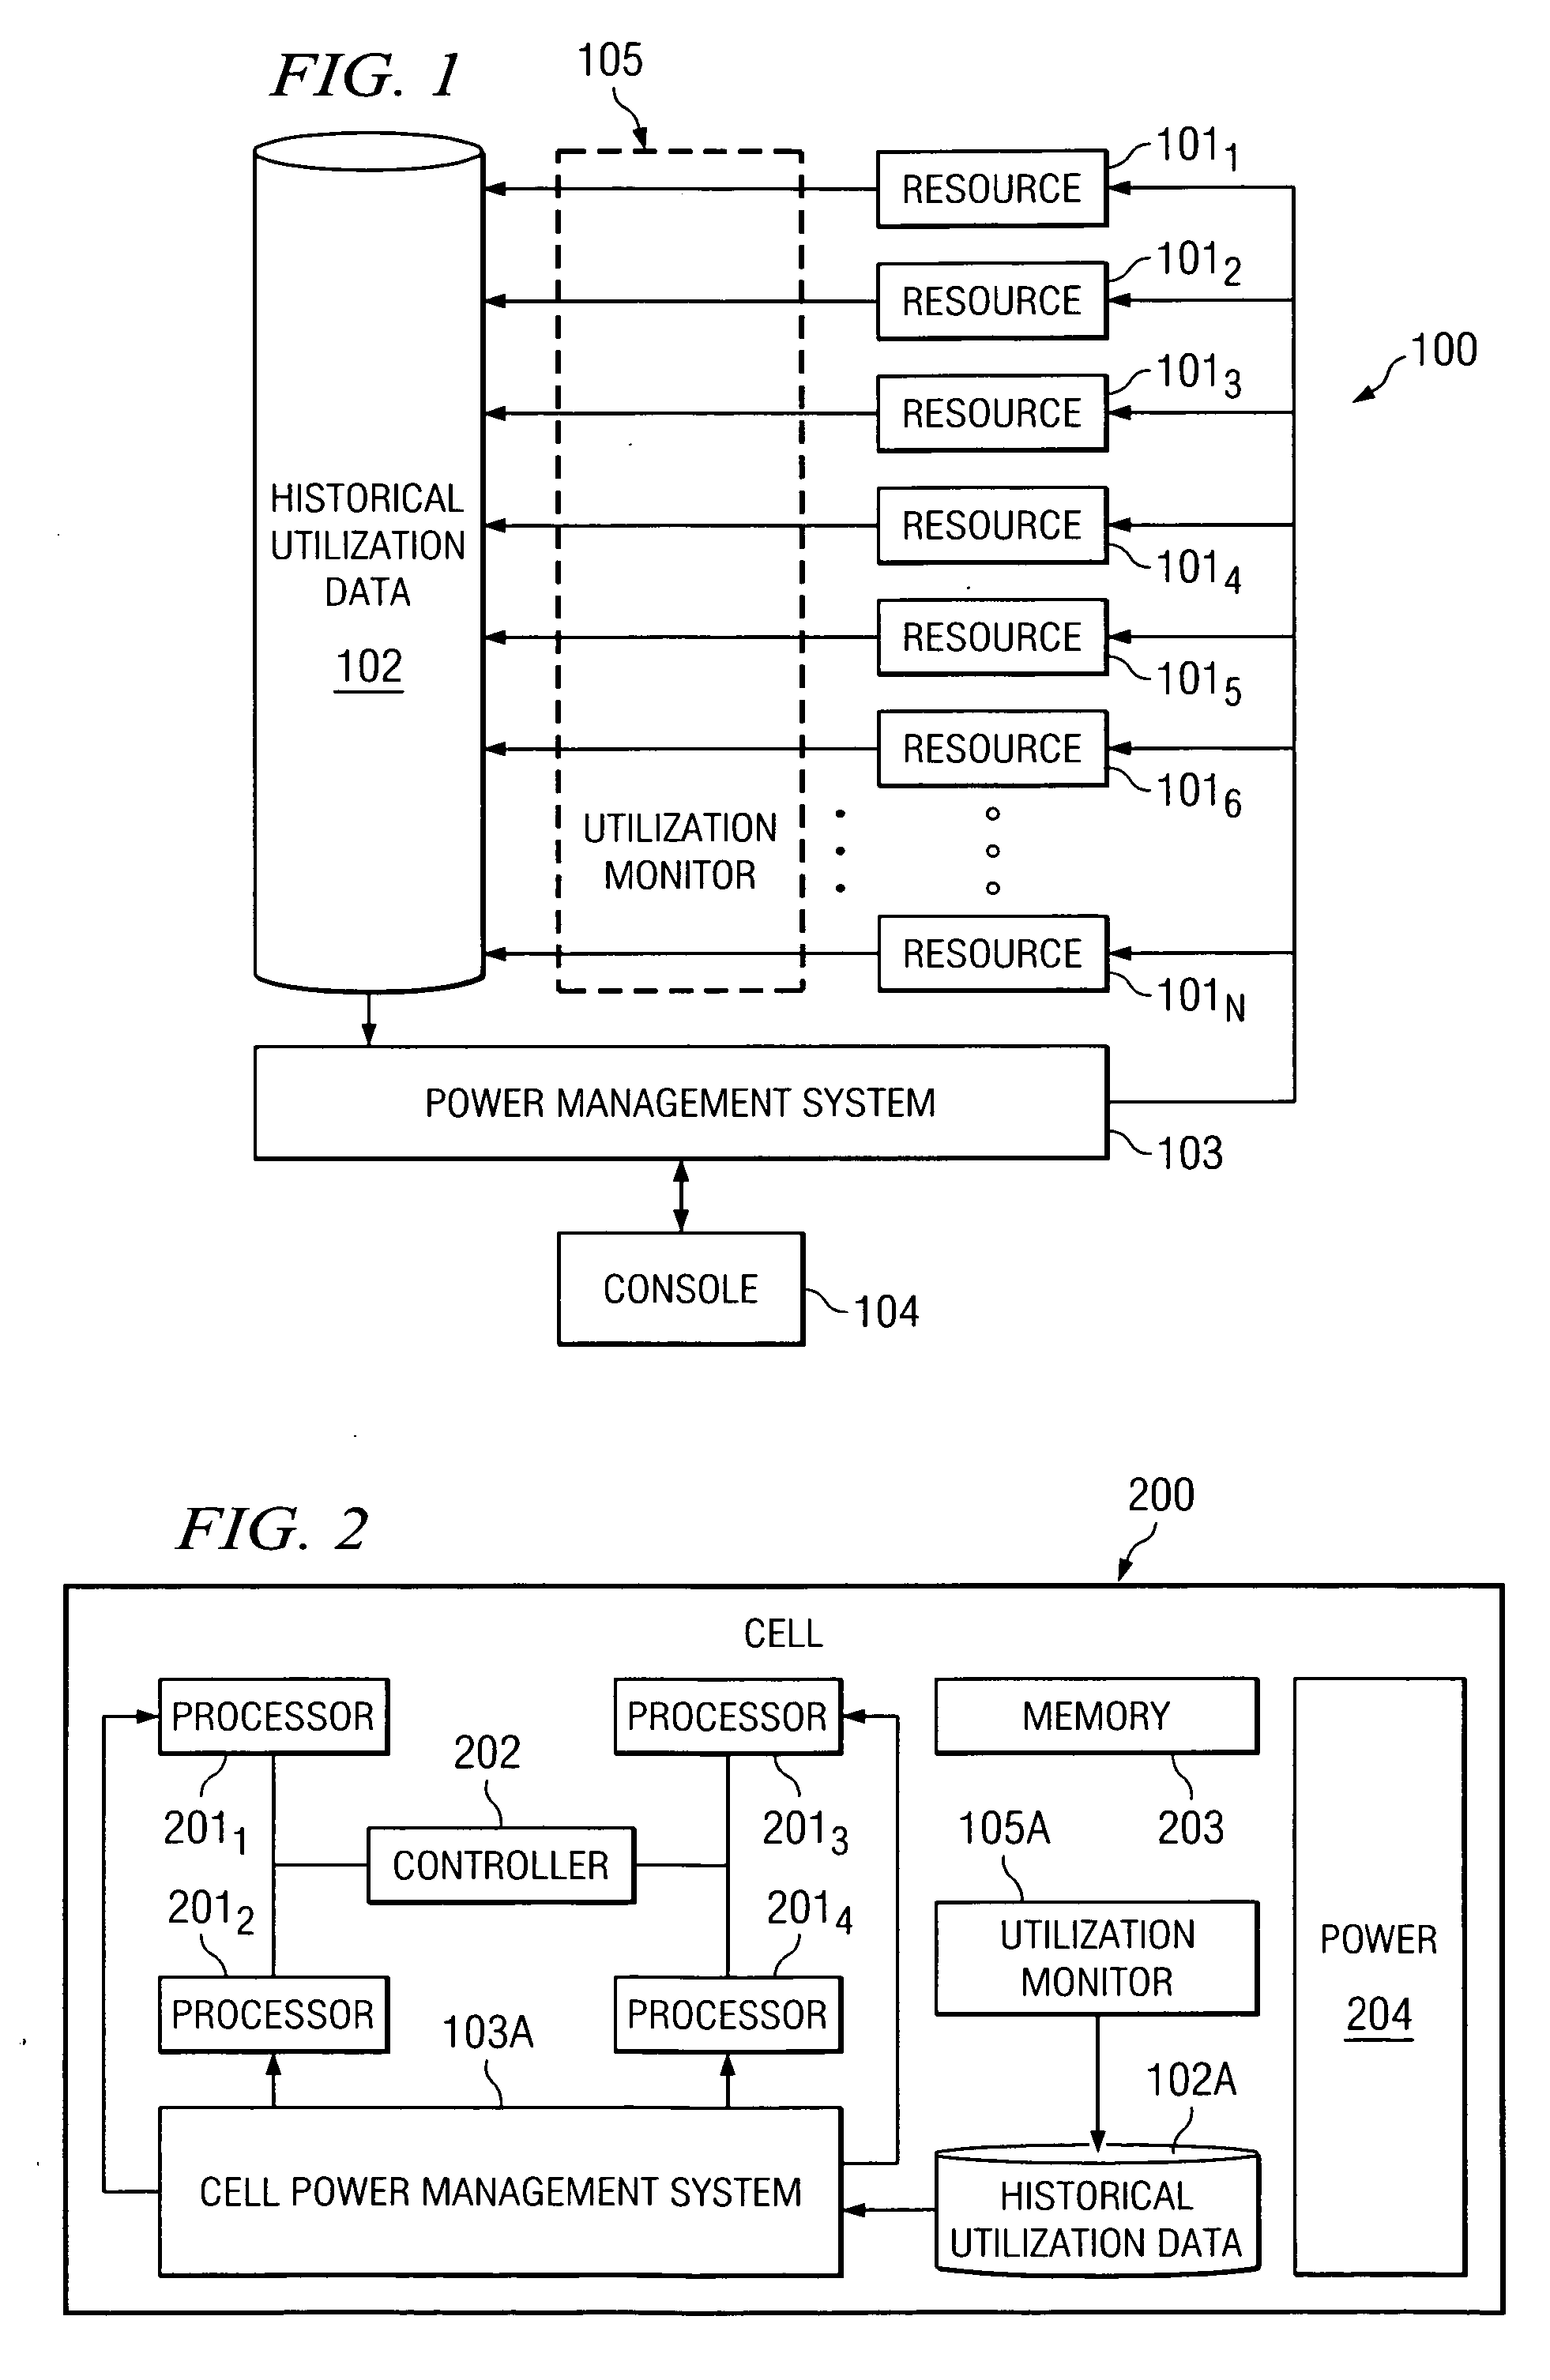 System and method for controlling power to resources based on historical utilization data